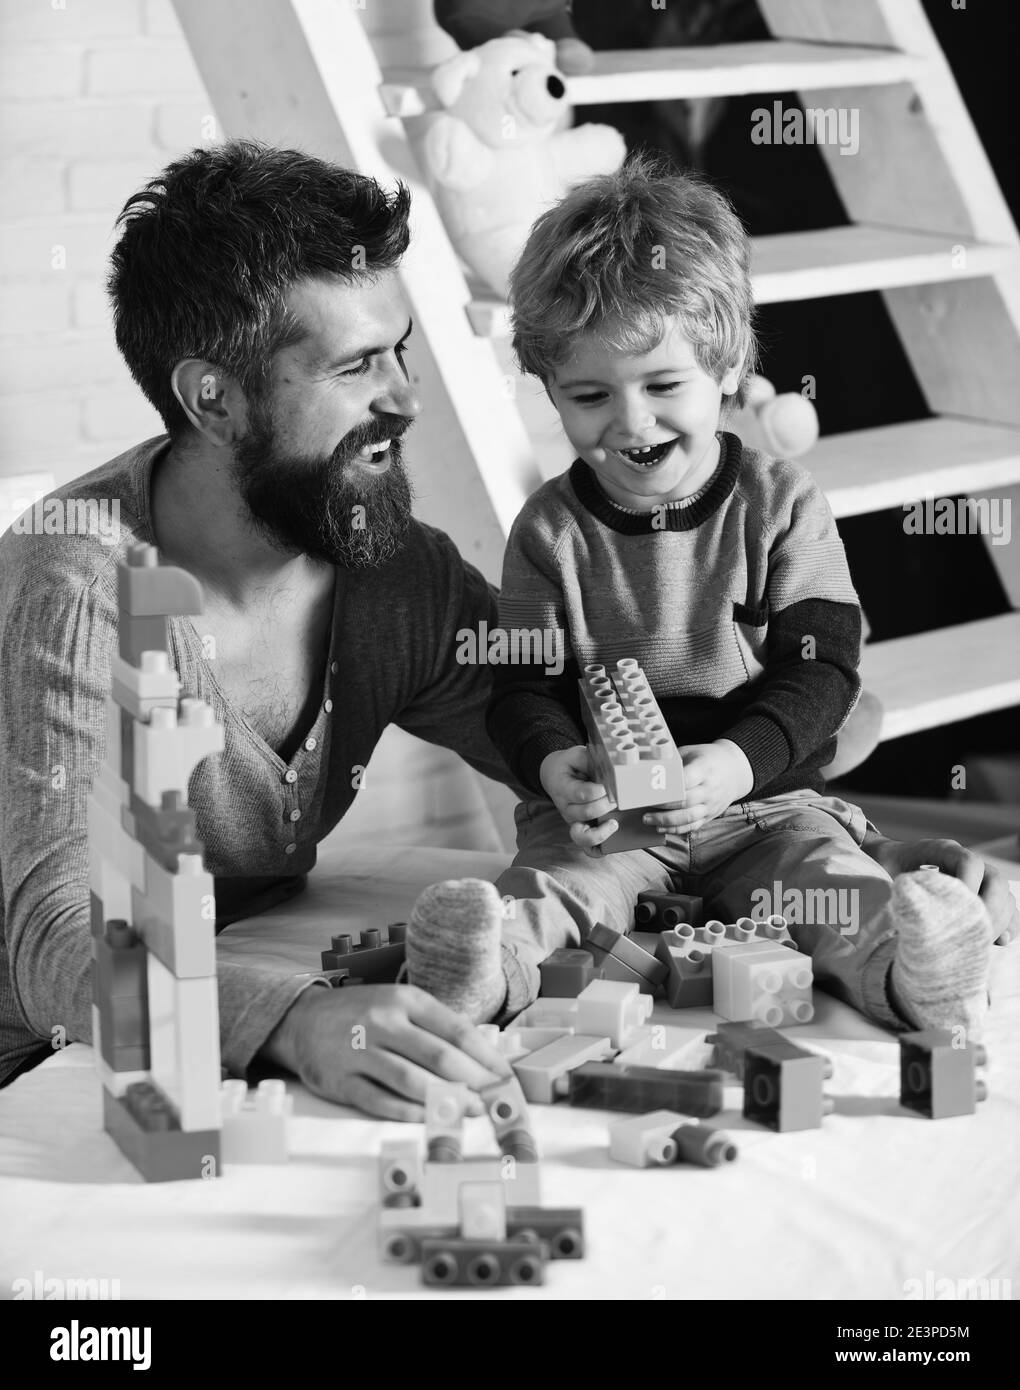 Dad and kid with ladder on background build of plastic blocks. Family and childhood concept. Man and boy play together. Father and son with happy faces create colorful constructions with toy bricks. Stock Photo